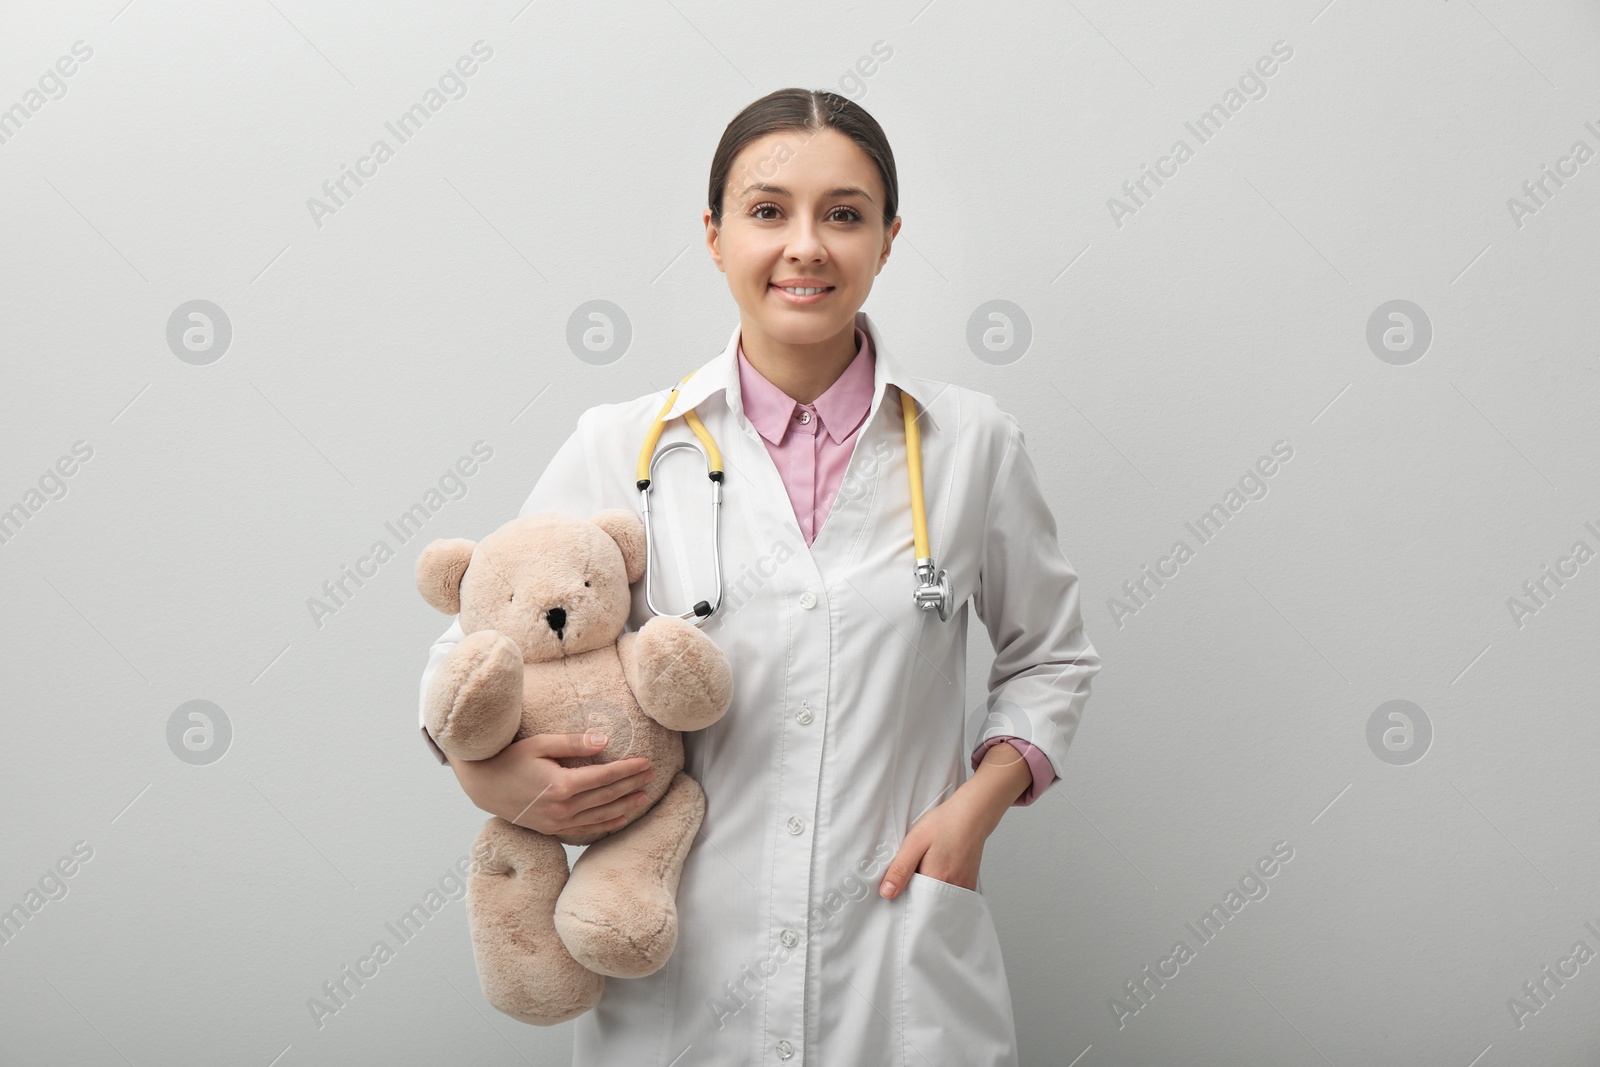 Photo of Pediatrician with teddy bear and stethoscope on light grey background